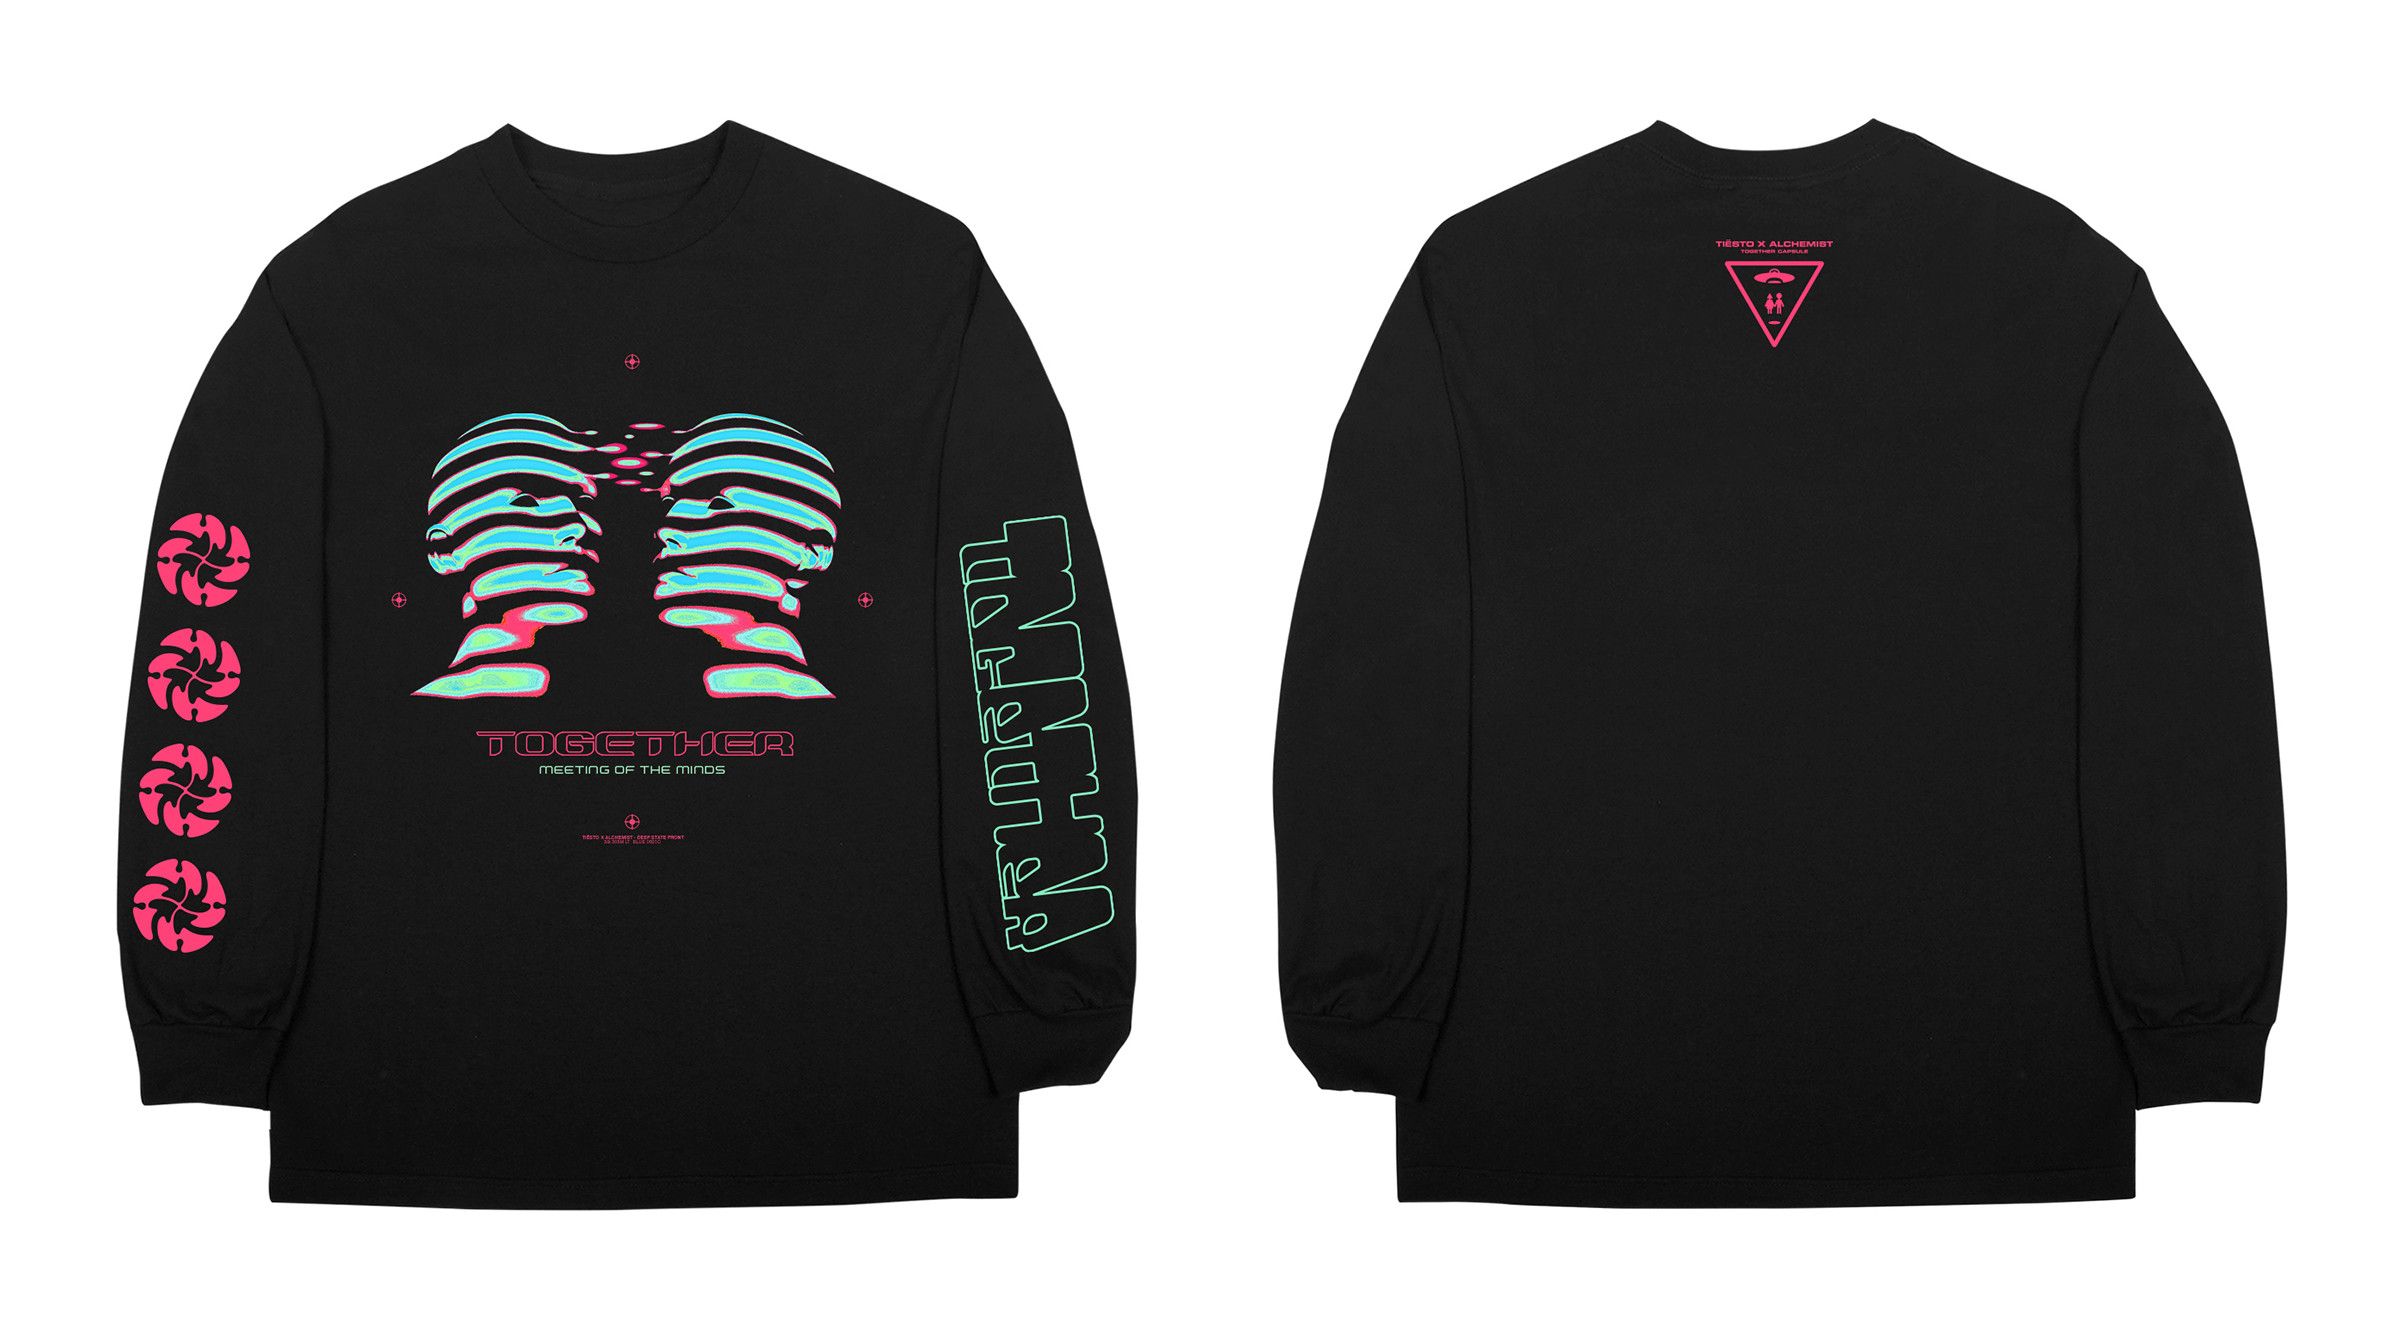 Tiësto x Alchemist &#x27;Together&#x27; Capsule Collection